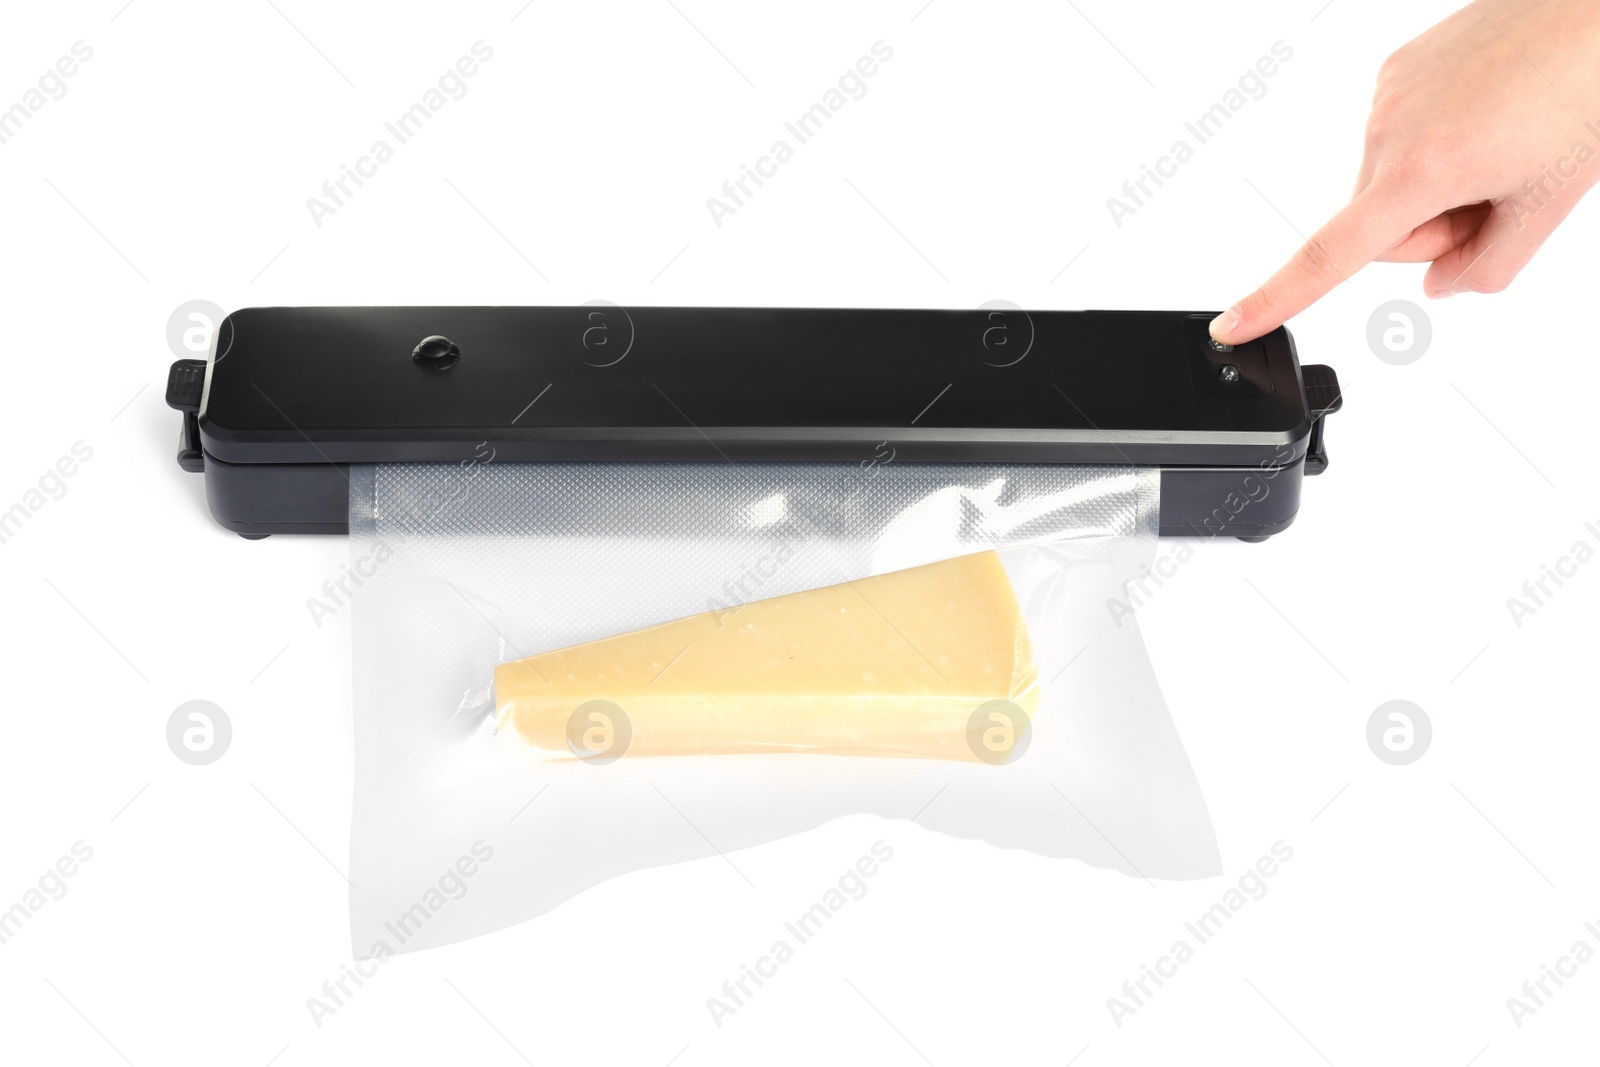 Photo of Woman packing cheese using vacuum sealer on white background, closeup